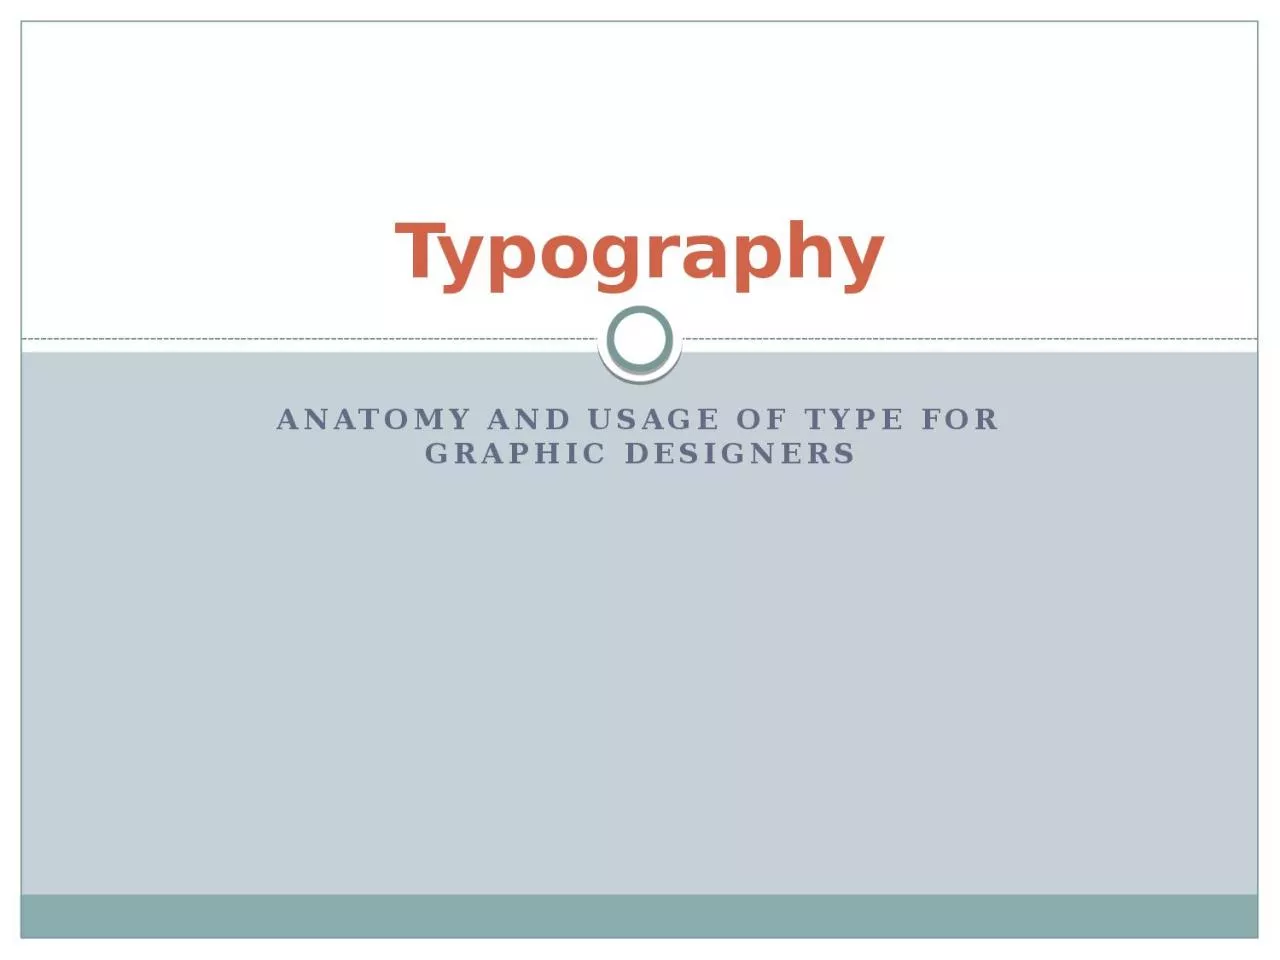 Anatomy and usage of type for graphic designers